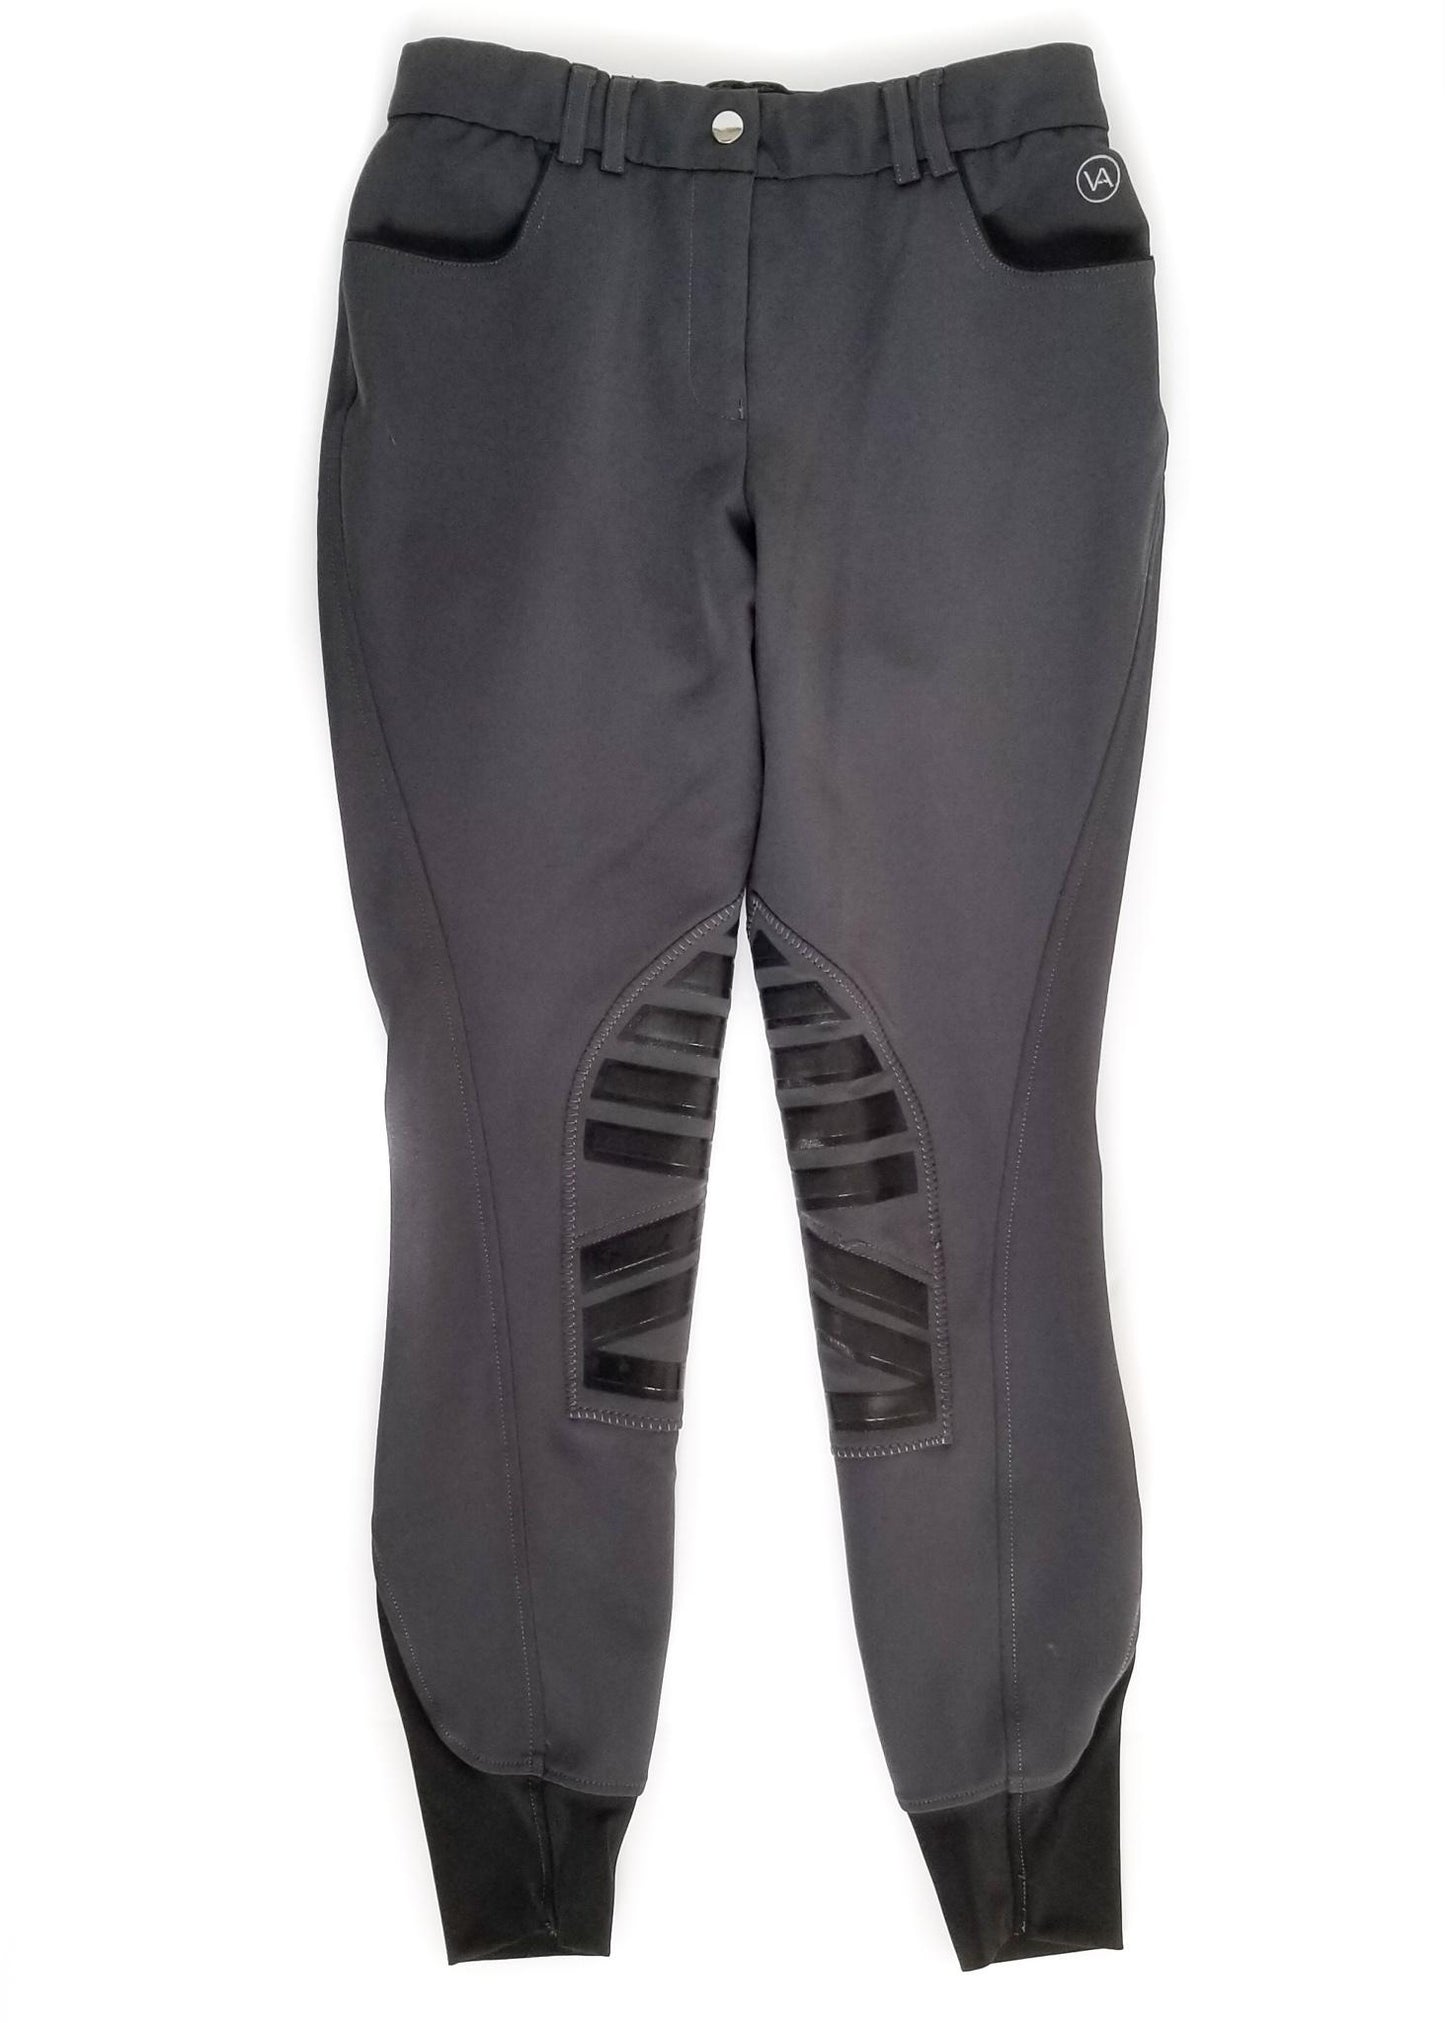 Vision Apparel - The Schooling Breech I - Charcoal - Women's 24